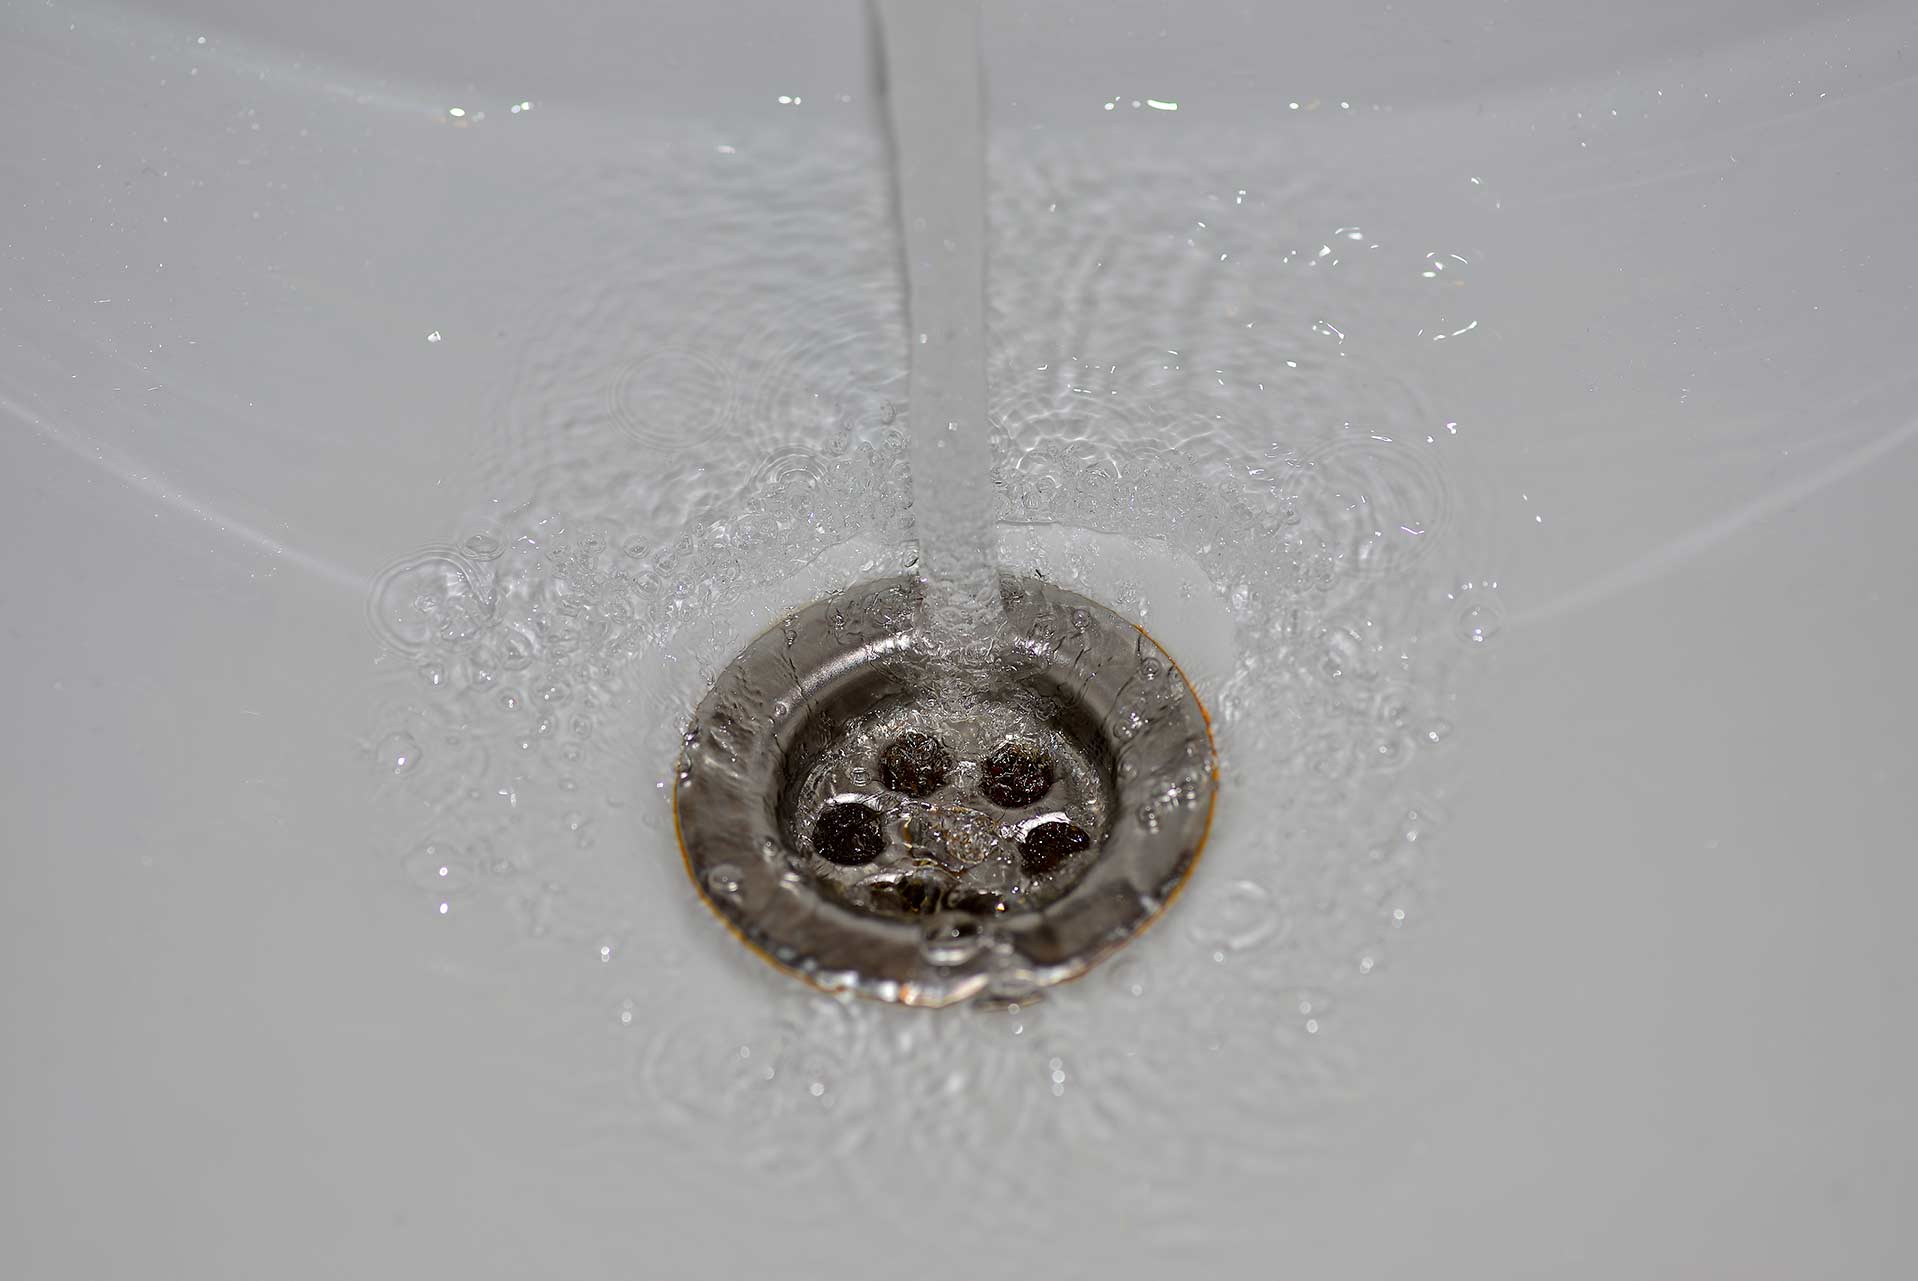 A2B Drains provides services to unblock blocked sinks and drains for properties in Godalming.